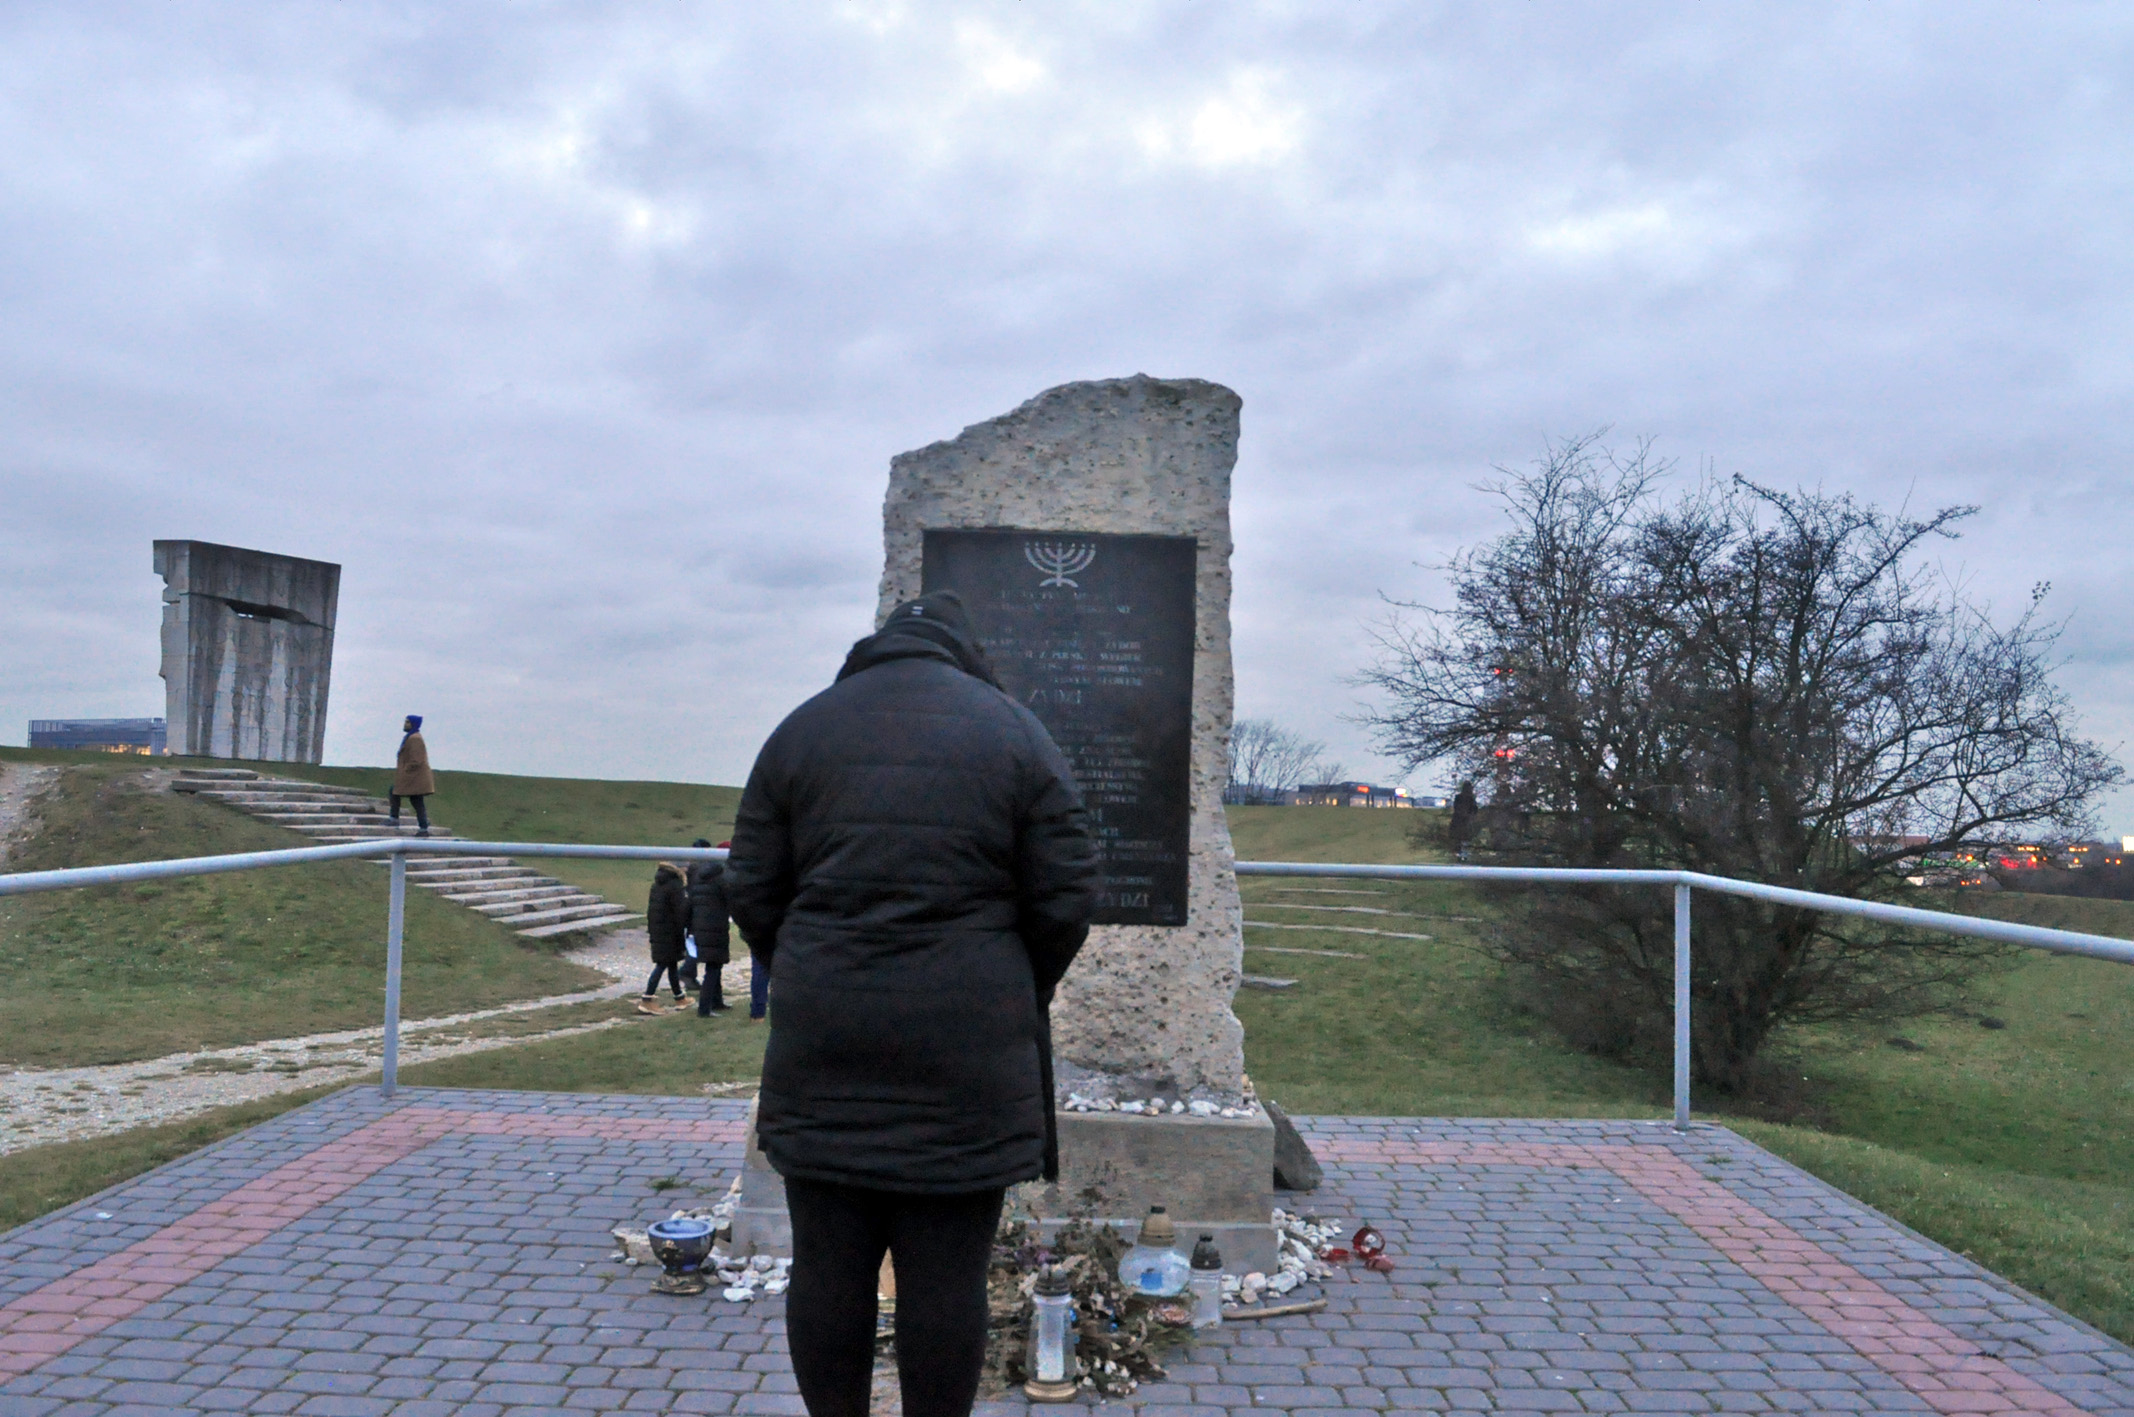 Photograph of Nicole Jones in front of a memorial to the Jews killed at Plaszow Concentration Camp